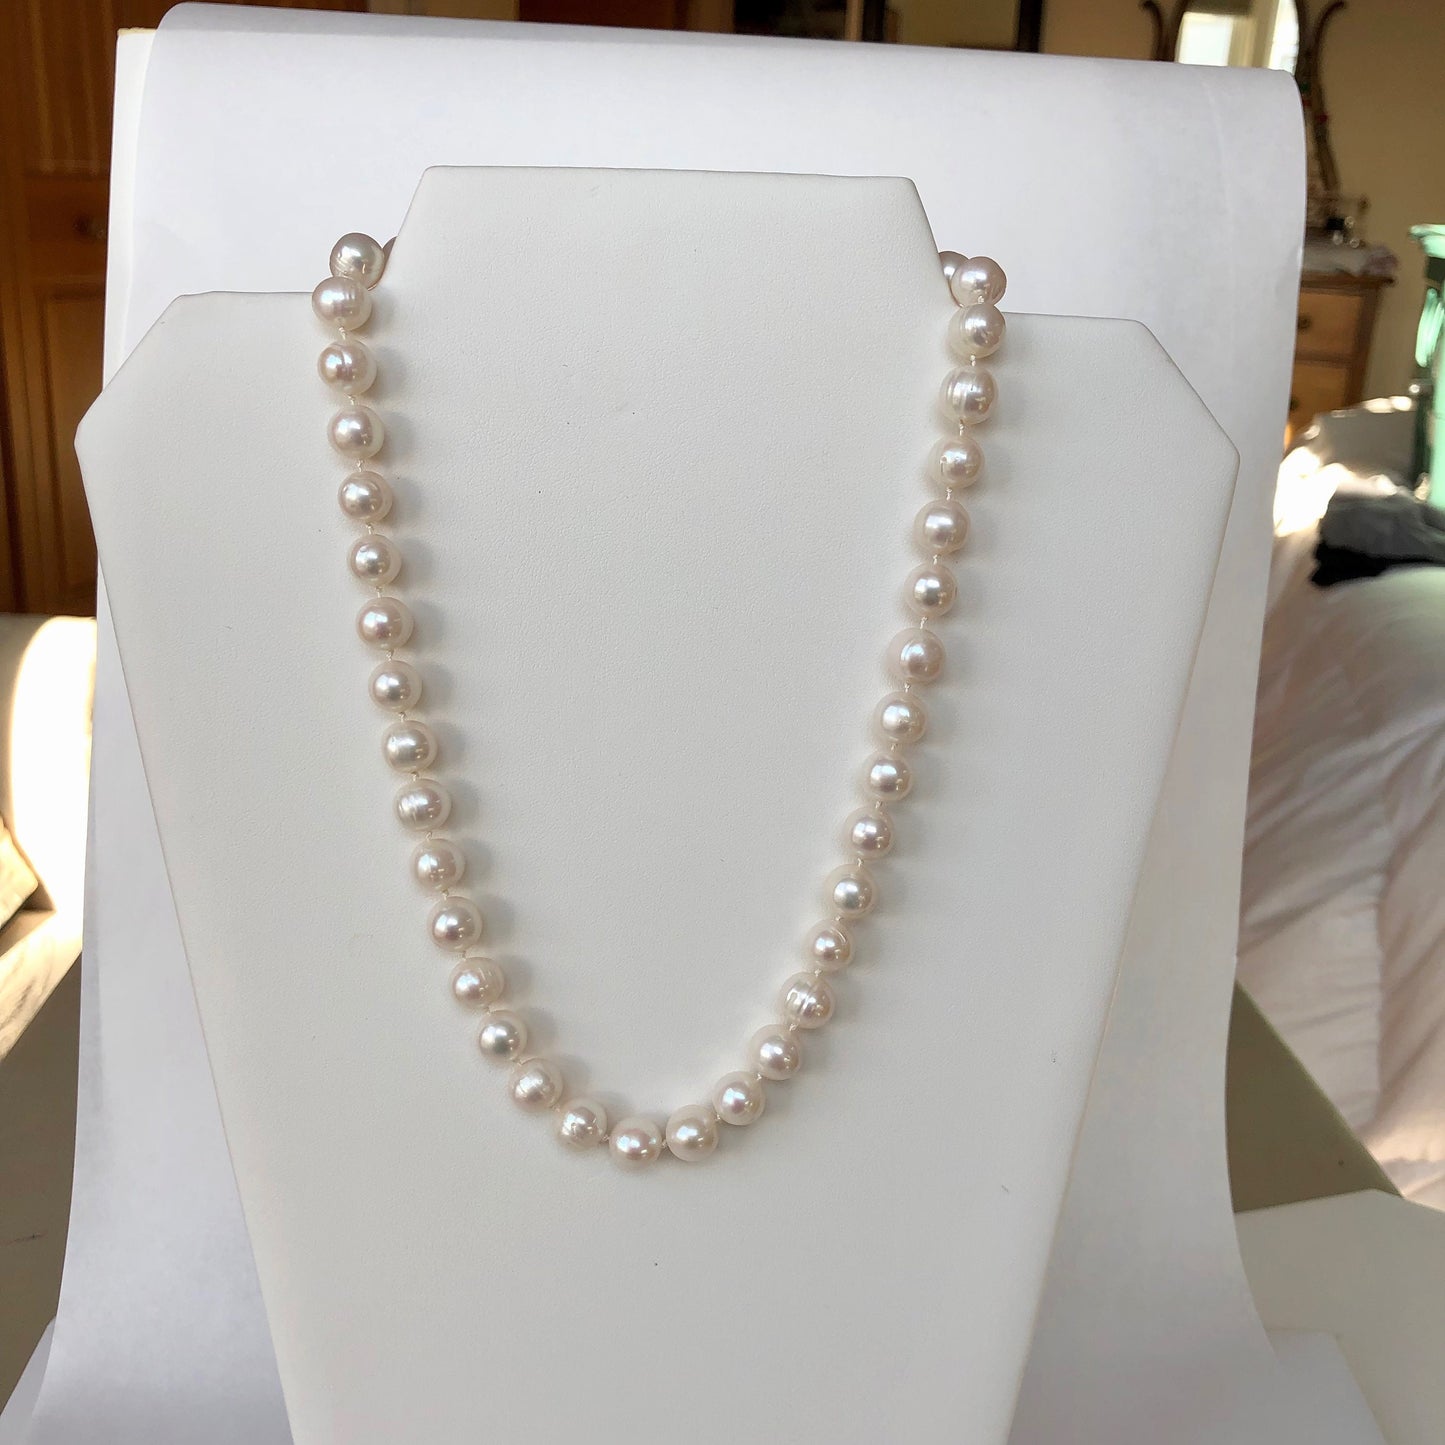 Pearls. Beautiful knotted fresh water pearl necklace. The necklace is finished with a filigree gold clasp.